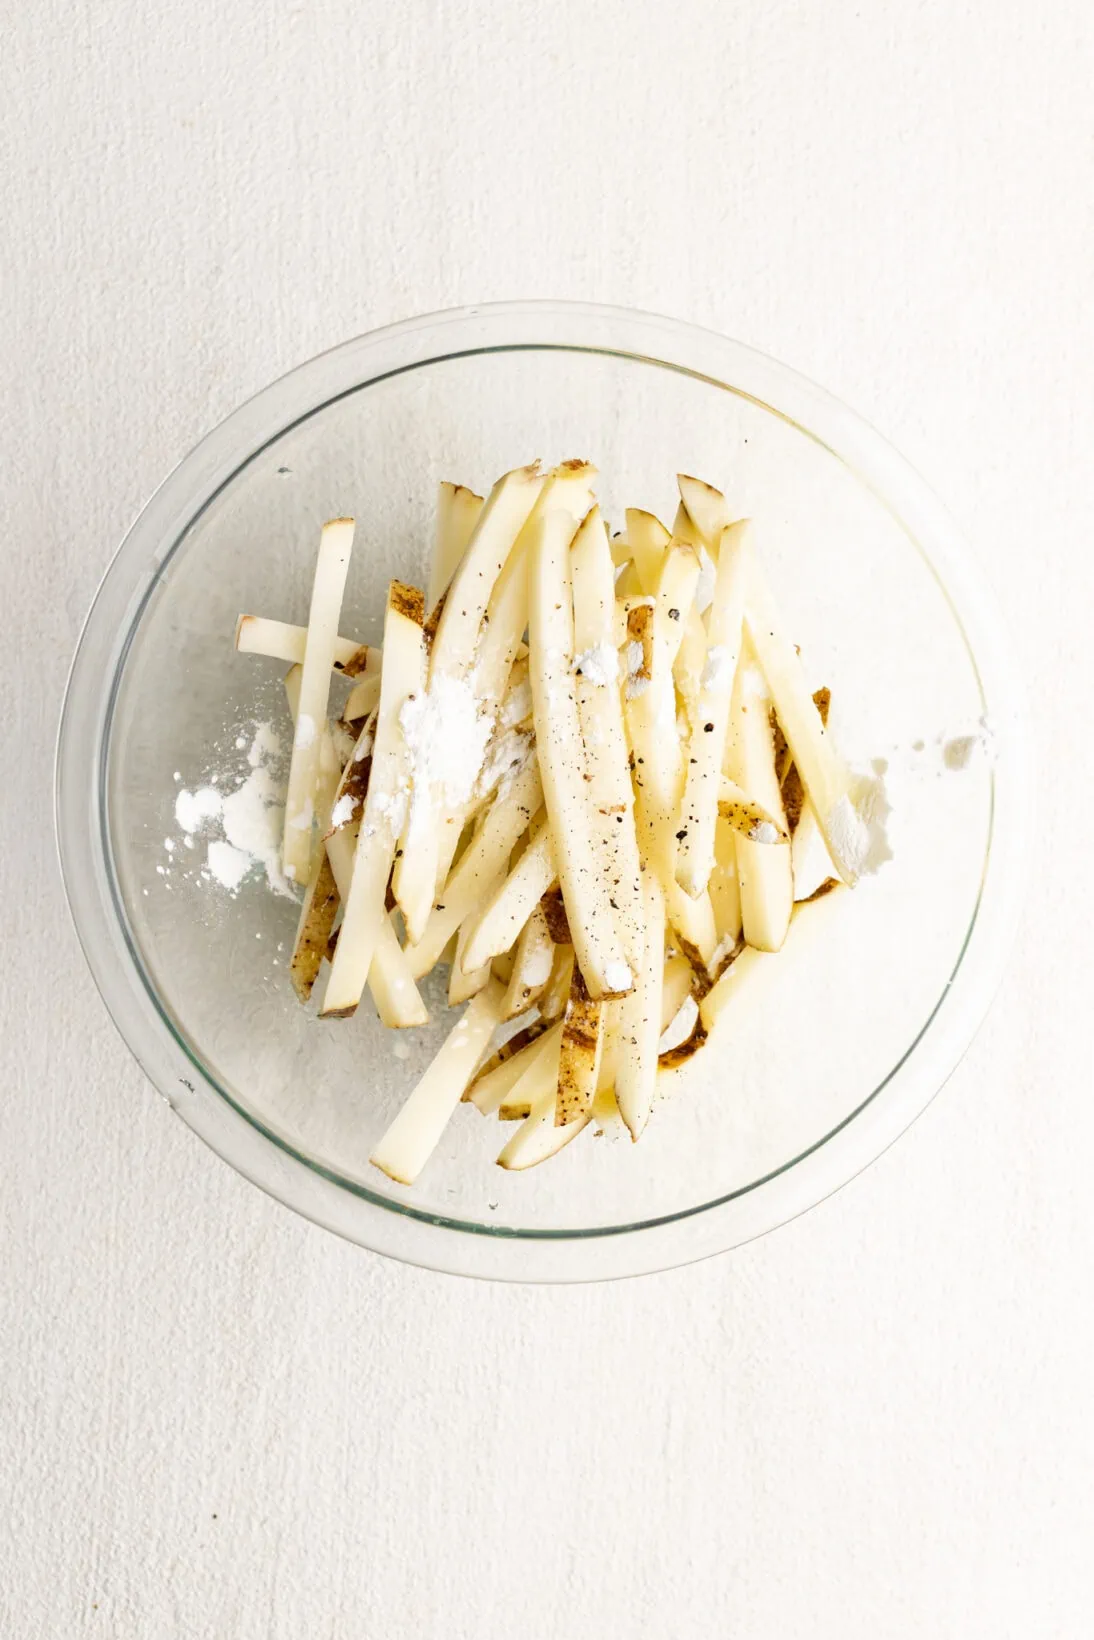 fries covered in corn starch salt and olive oil